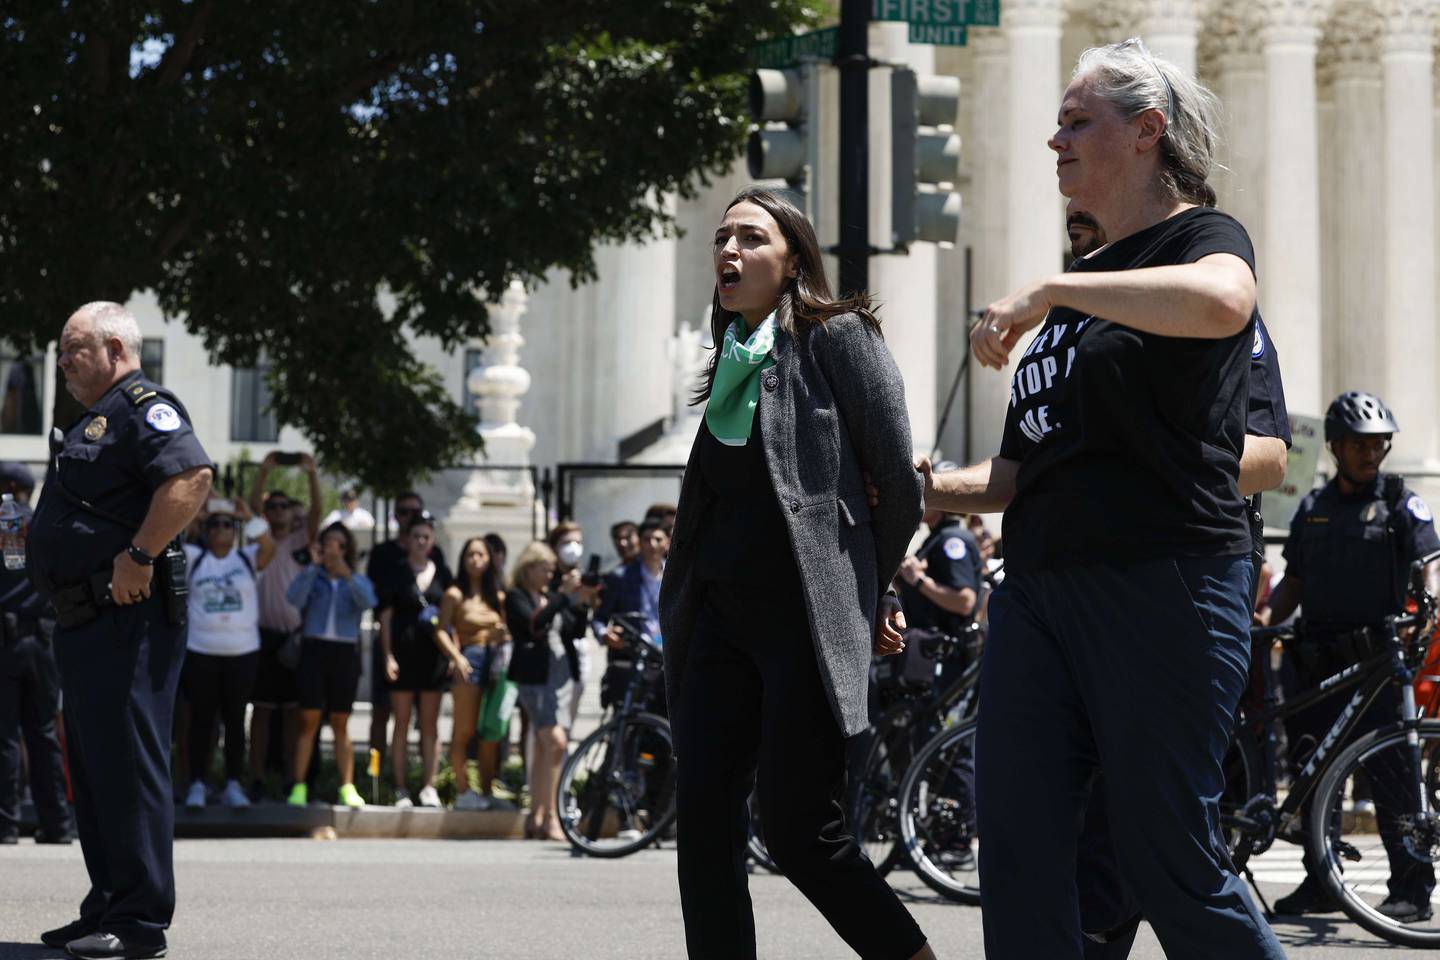 WASHINGTON, DC - JULY 19: Rep. Alexandria Ocasio-Cortez (D-NY) is detained by U.S. Capitol Police Officers after participating in a sit in with activists from Center for Popular Democracy Action (CPDA) in front of the U.S. Supreme Court Building on July 19, 2022 in Washington, DC. The CPDA held the protest with House Democrats in support of abortion rights.   Anna Moneymaker/Getty Images/AFP